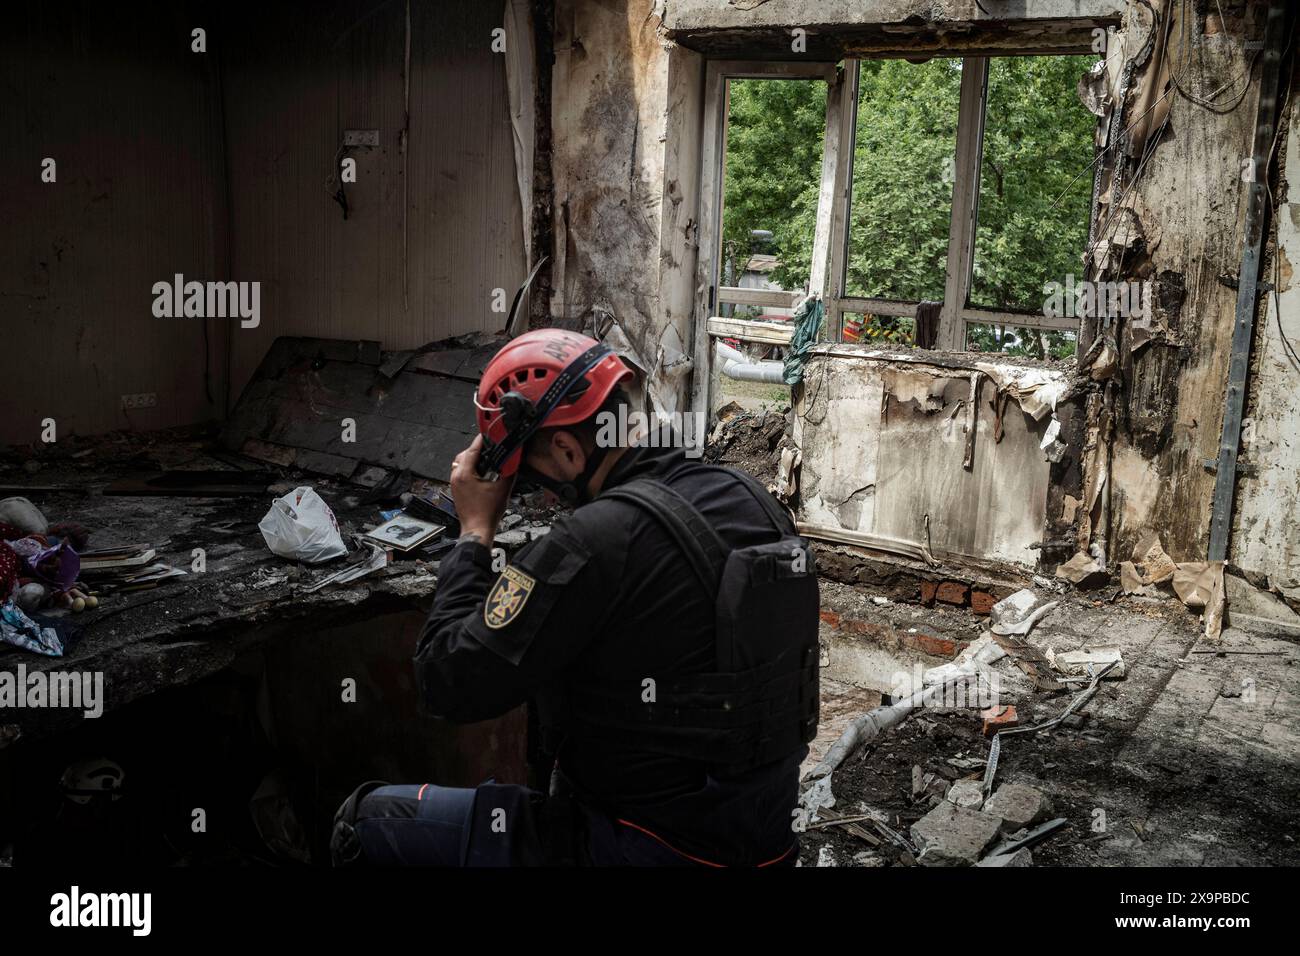 Nicolas Cleuet/Le Pictorium - Kharkiv - Two days after the attack on the residential district of Novobavarsky - 01/06/2024 - Ukraine/kharkiv oblast/Kharkiv - Two days after the strikes on a building in the Novobavarsky district, residents are trying to get back to life while the emergency services are busy. The fire brigade is still looking for evidence, and volunteers are clearing the area. The municipal services launched the first rehabilitation operations. Psychologists meet the most shocked.?The fire brigade discovered the remains of an eighth victim.? Stock Photo